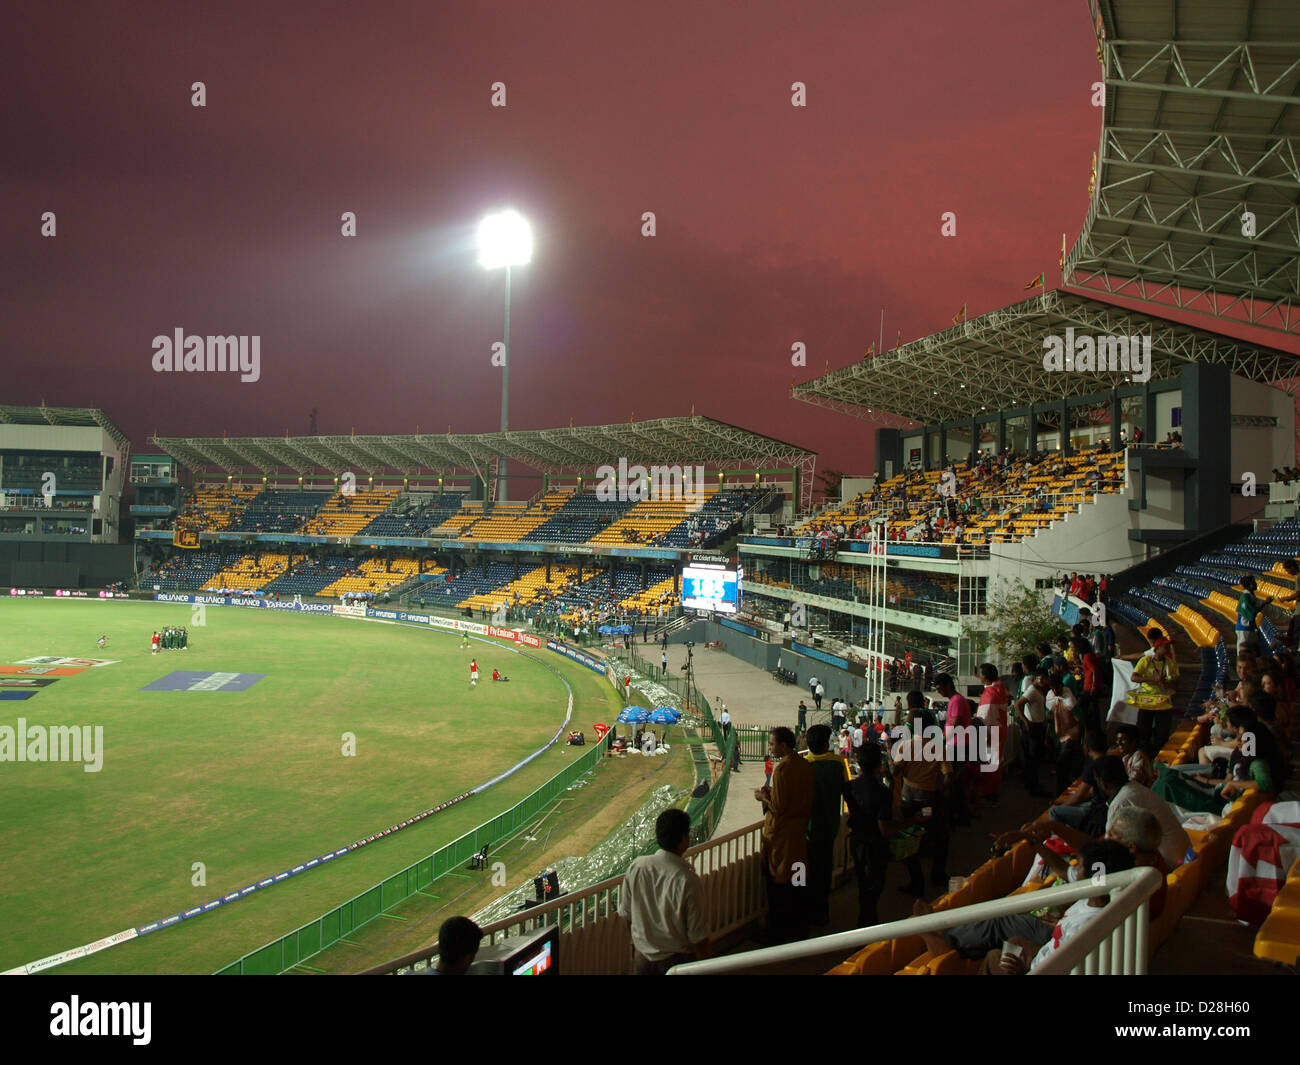 A view across the stands of the Premadasa Stadium in Colombo Sri Lanka at dusk during a world cup cricket match Stock Photo